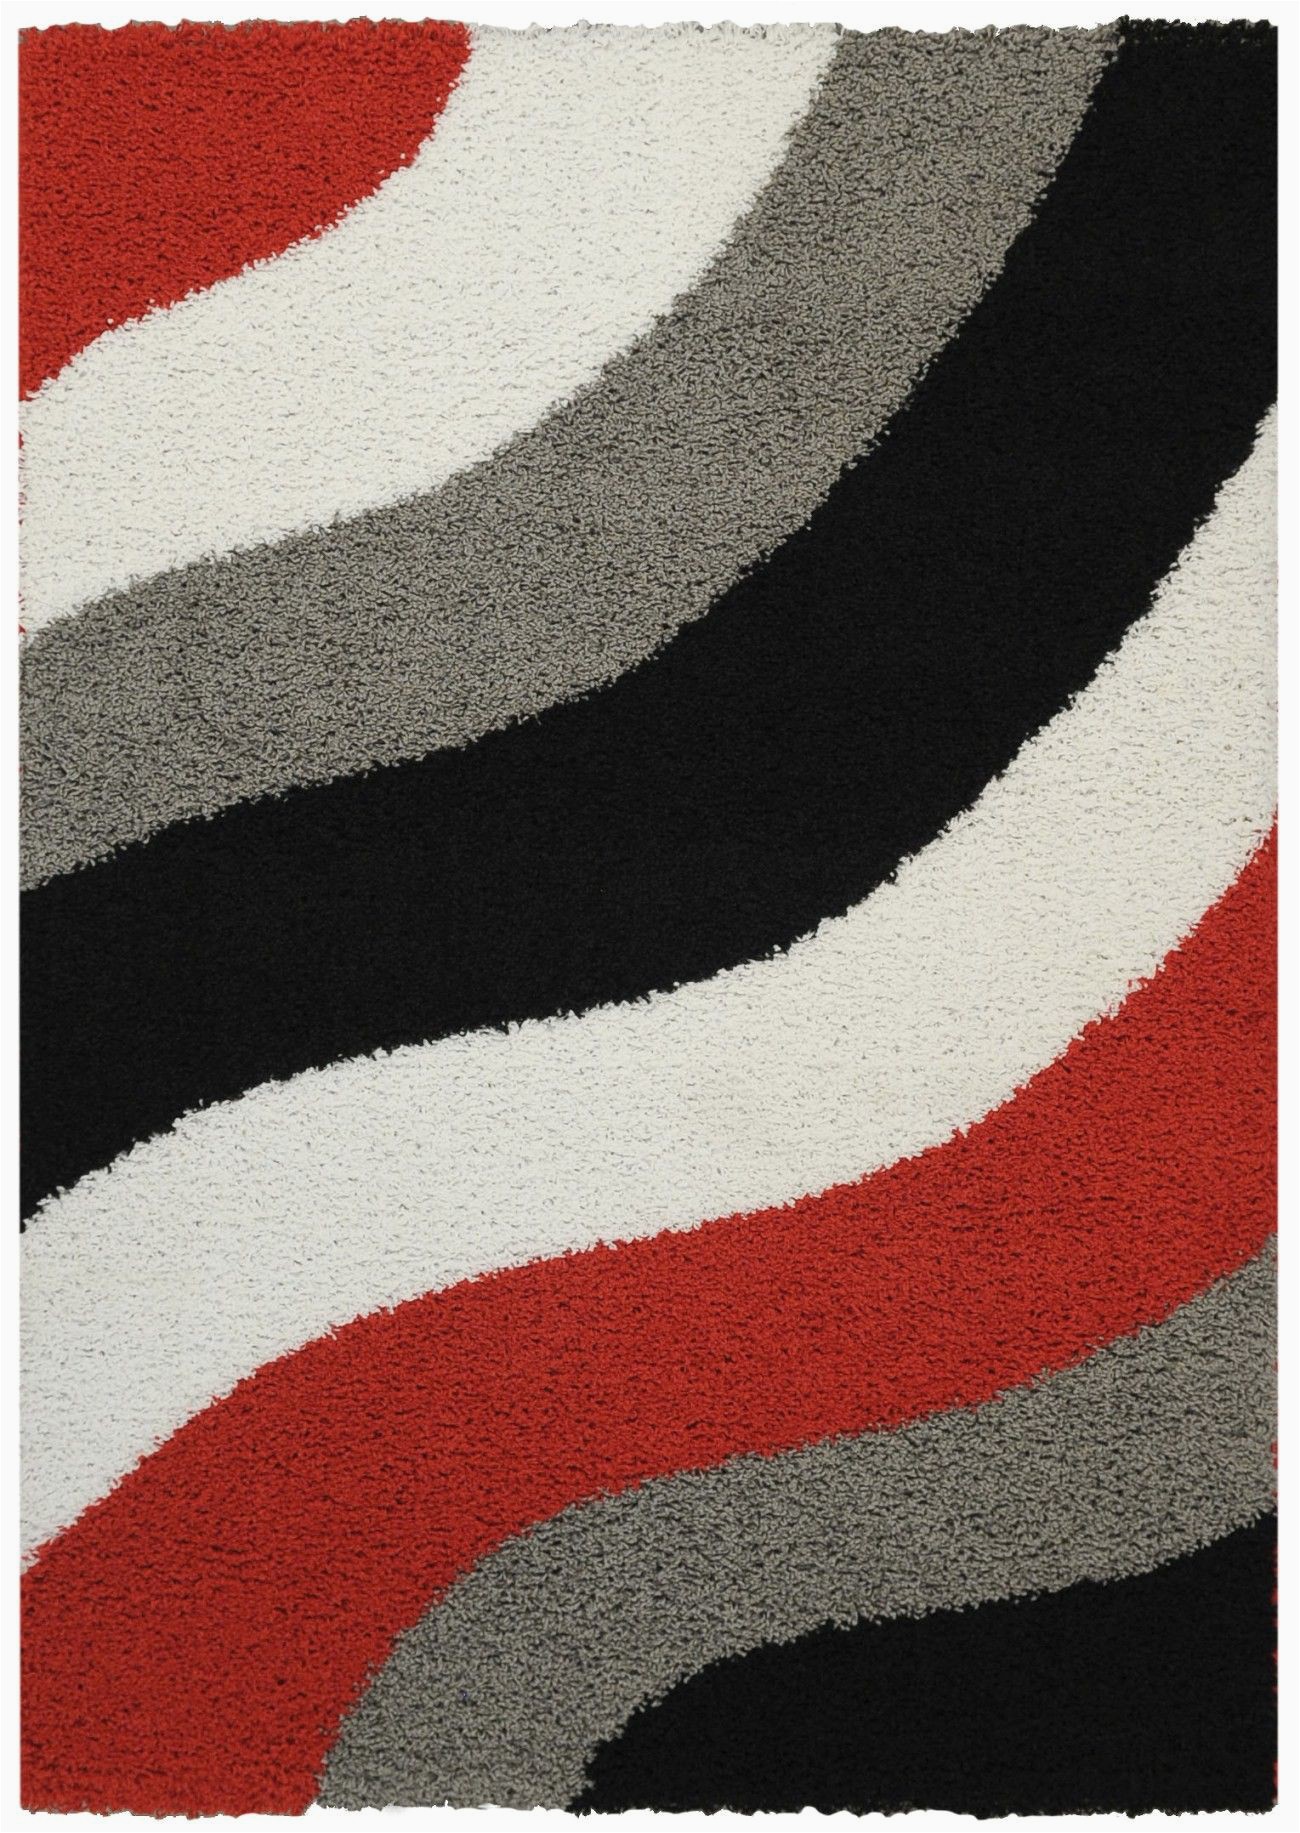 Red and White Striped area Rug Bella Maxy Home Block Striped Waves Contemporary Shag area